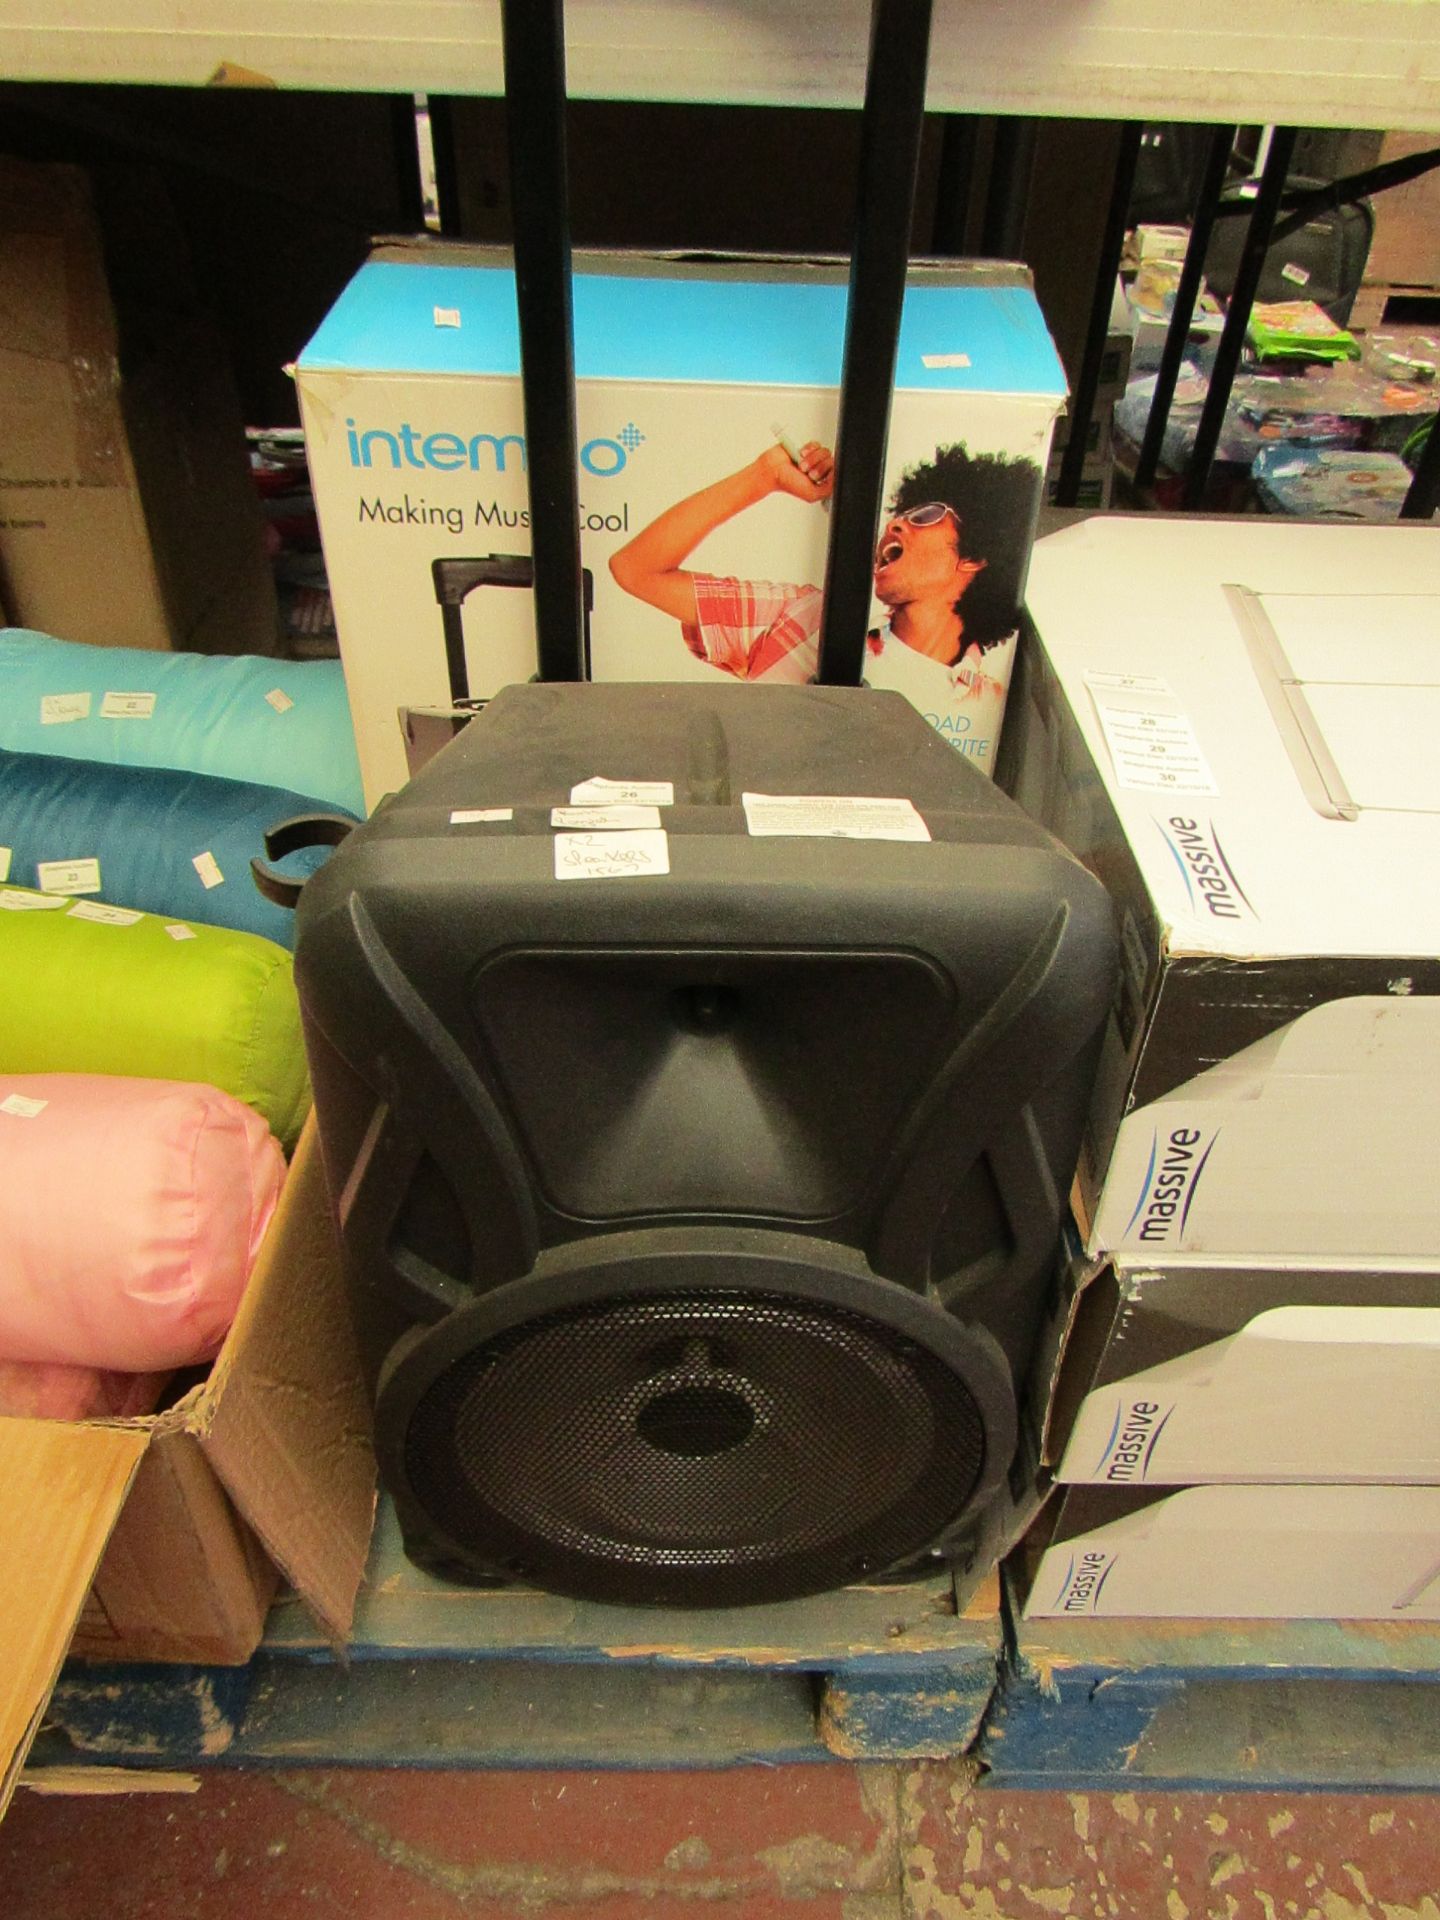 2x Speakers being; Intempo karaoke speaker and Large speaker with handle. Both power on and one is